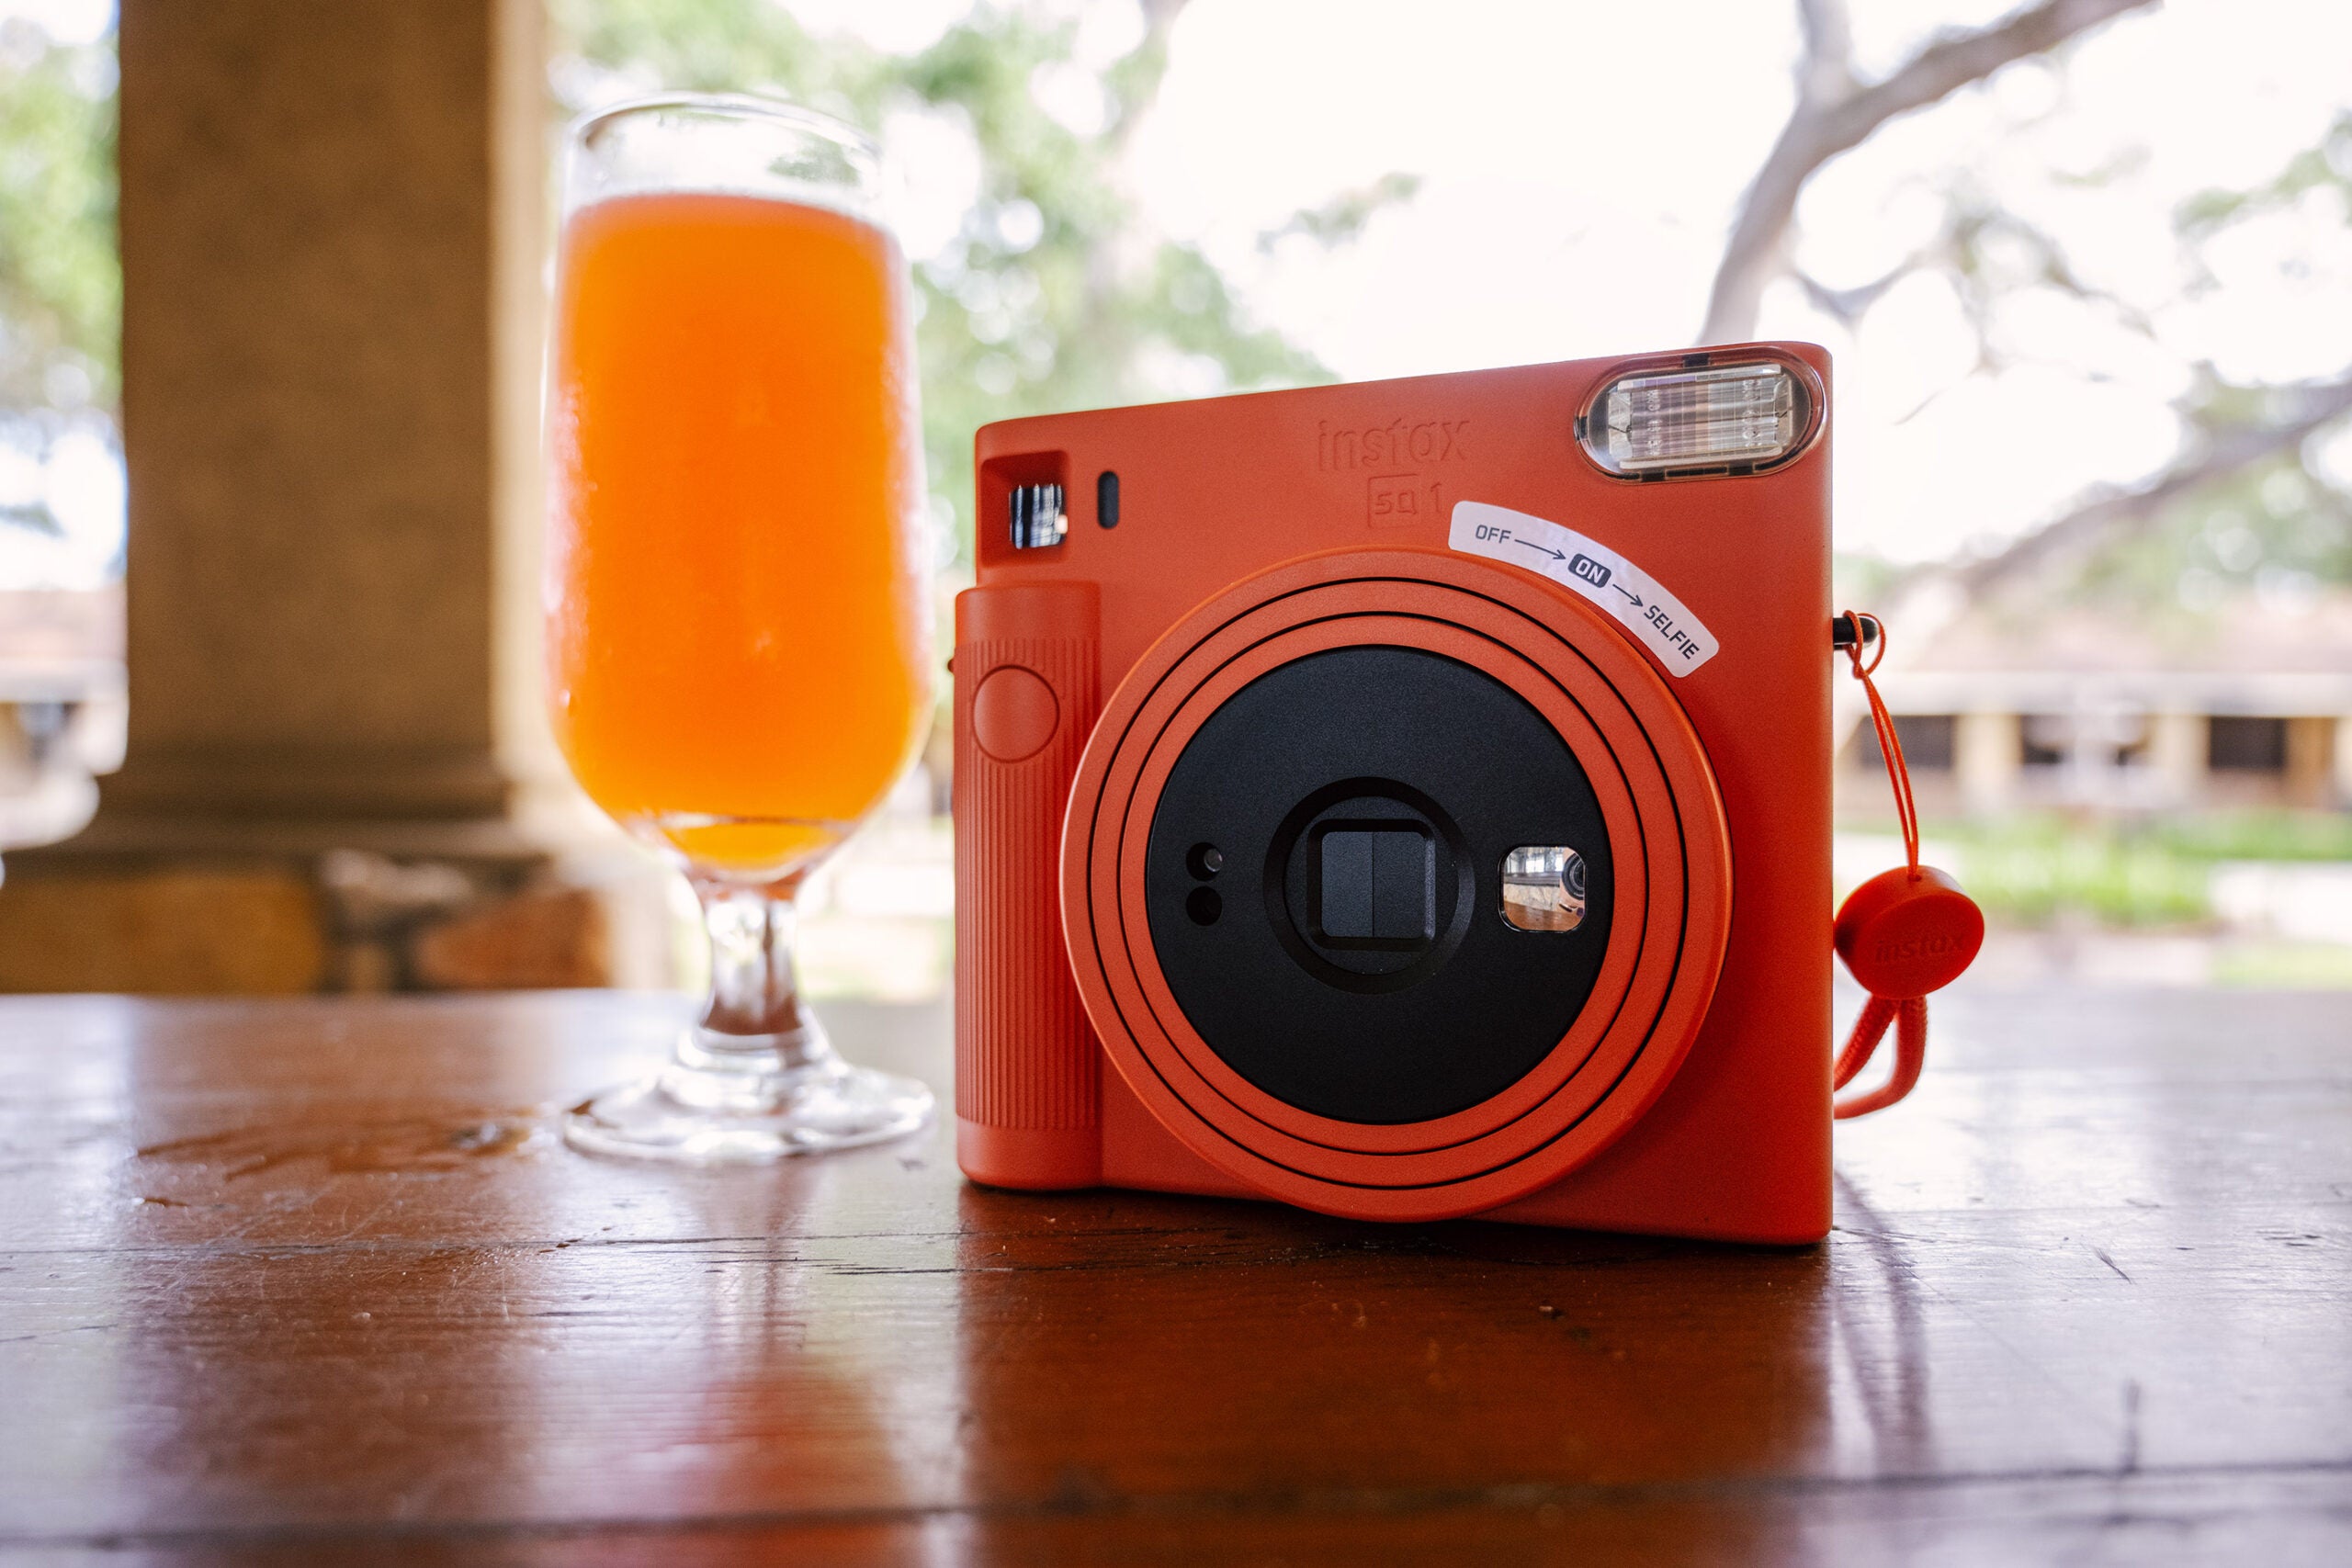 Instax Square SQ1 review: Modern yet old-school